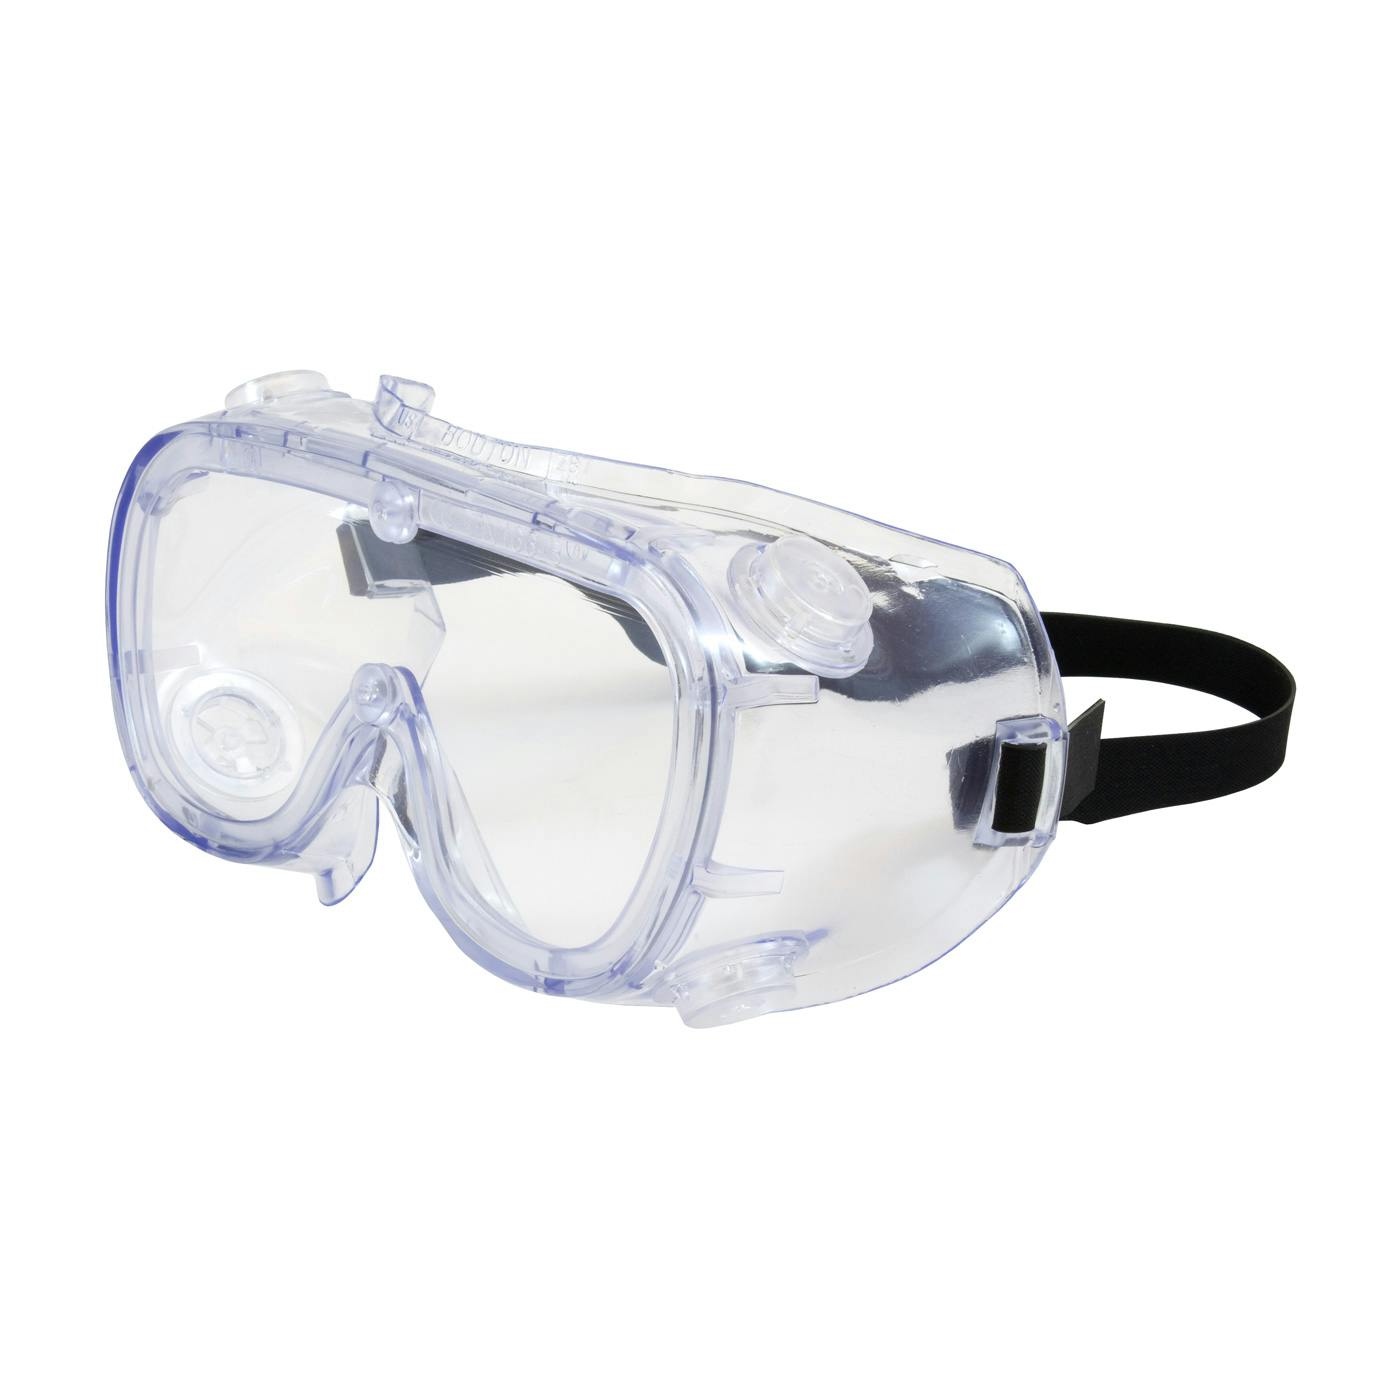 Indirect Vent Goggle with Clear Blue Body, Clear Lens and Anti-Scratch / Anti-Fog Coating, Clear (248-5190-400B) - OS_0